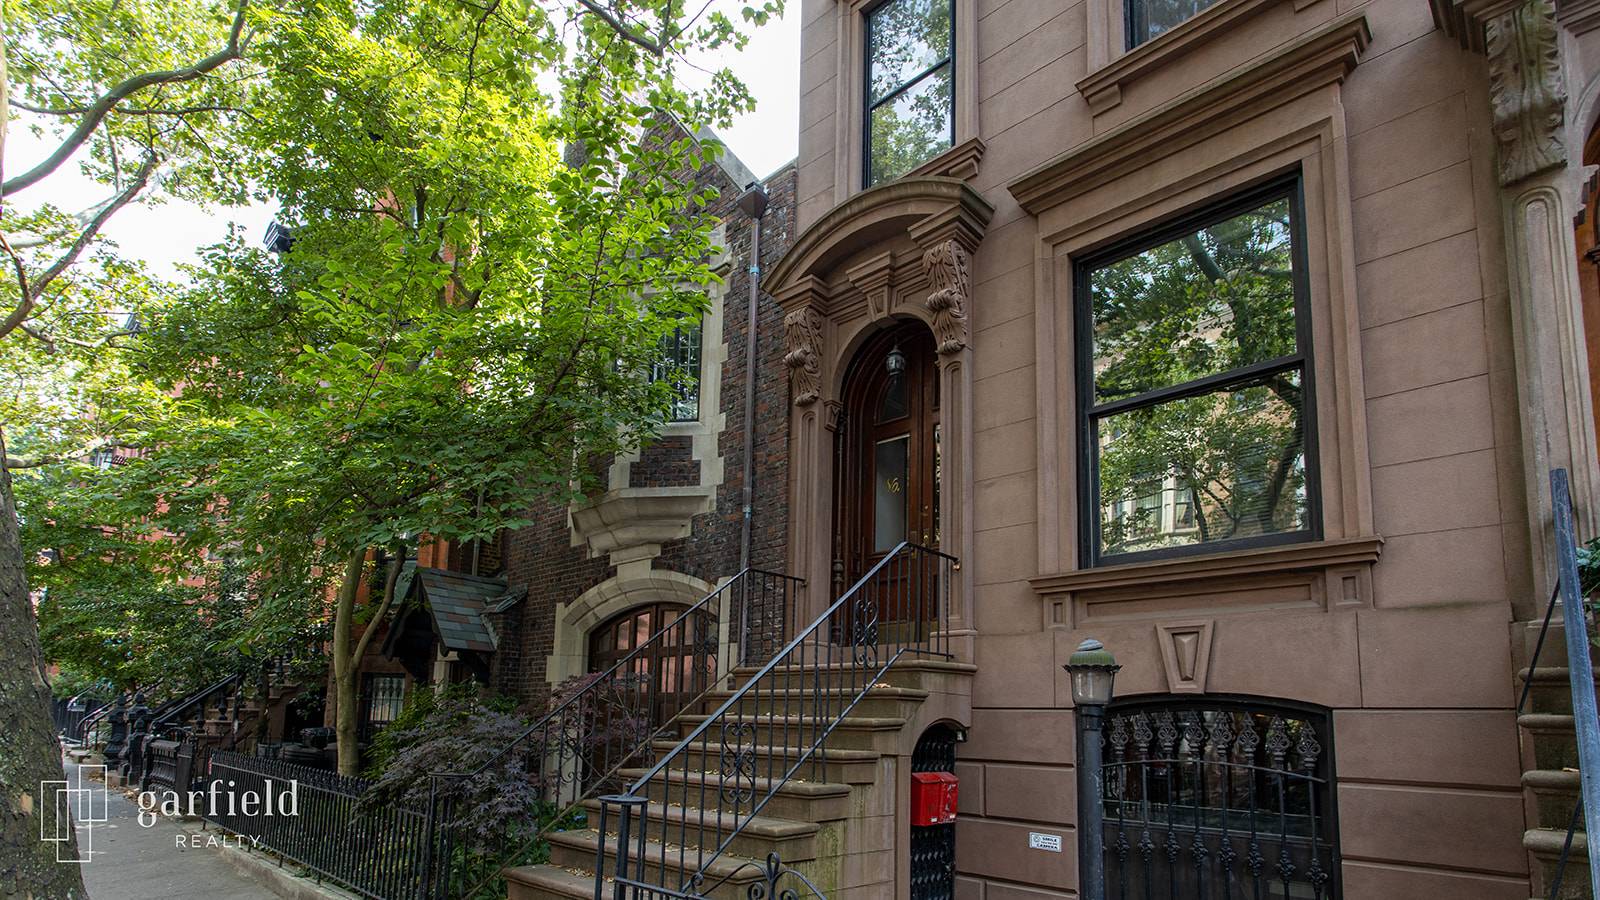 Offering quintessential brownstone charm on a tree lined Park Slope block, this handsome 4 story, 2 family renovated townhouse features an airy triplex along with a 2 bedroom, 1 bathroom ...